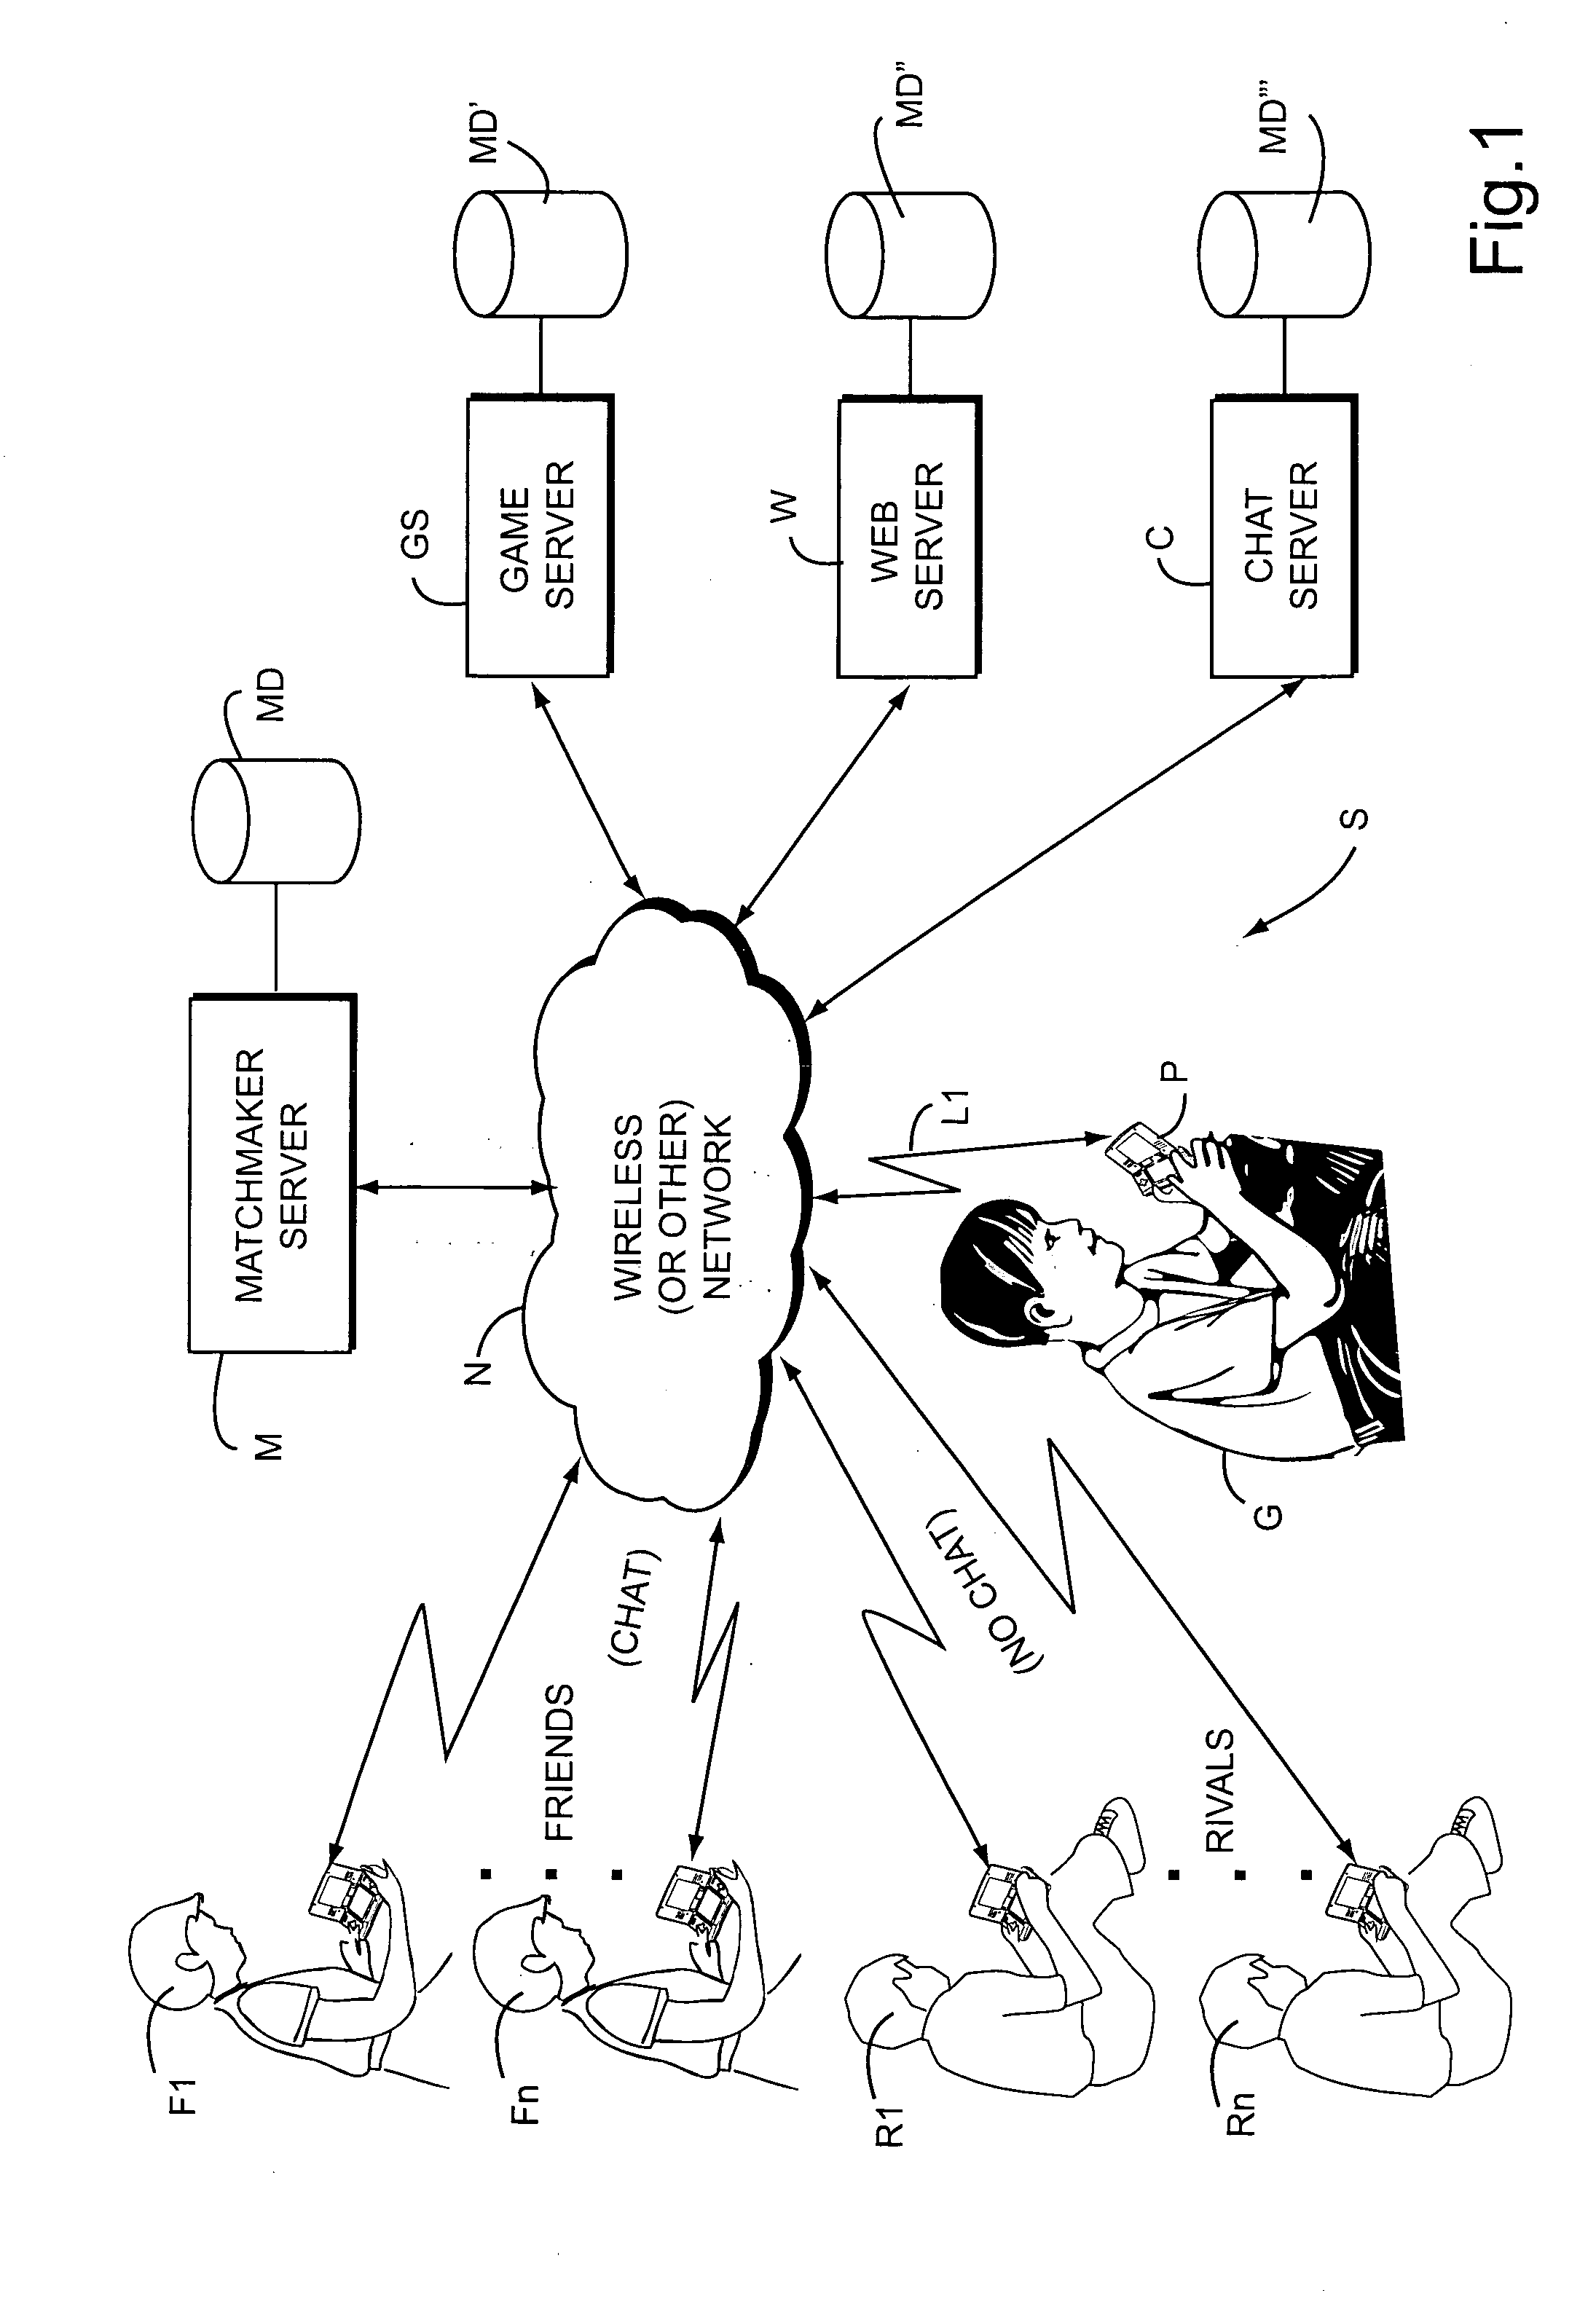 Systems, methods and techniques for safely and effectively coordinating video game play and other activities among multiple remote networked friends and rivals